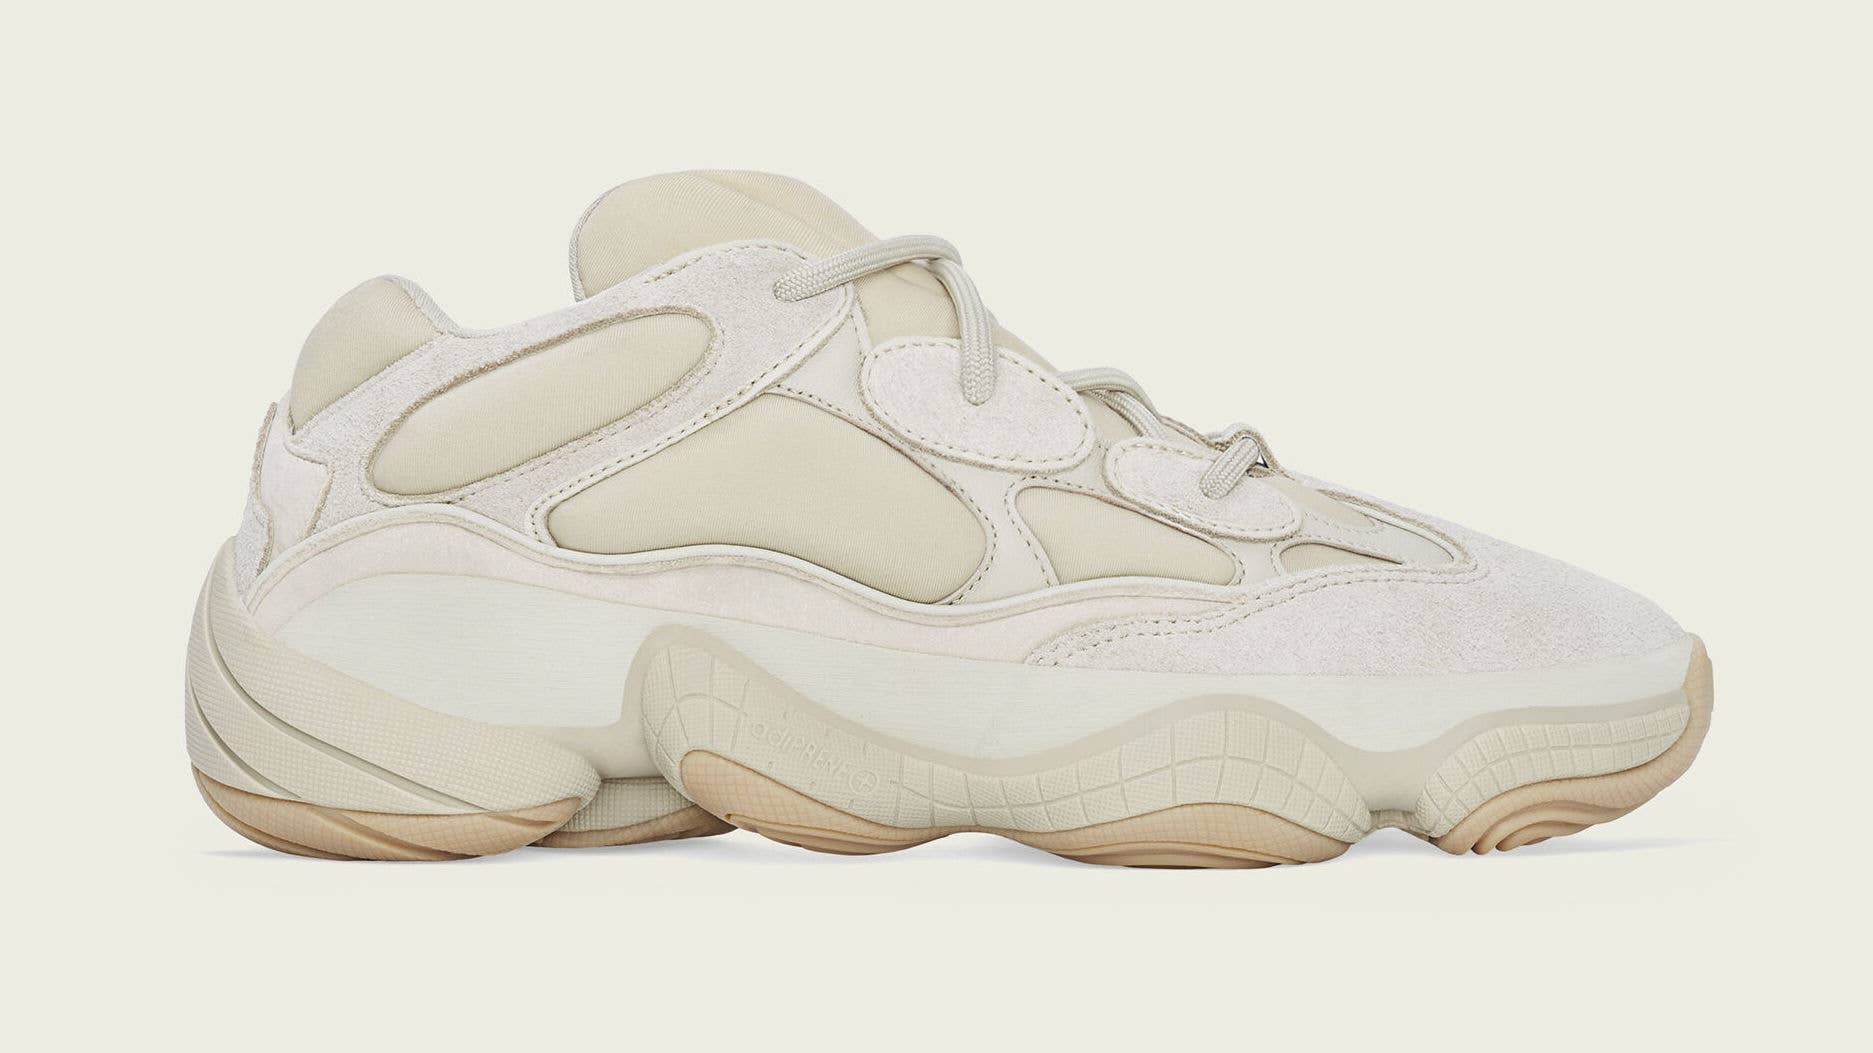 Best Look Yet at 'Stone' Adidas Yeezy 500 | Complex